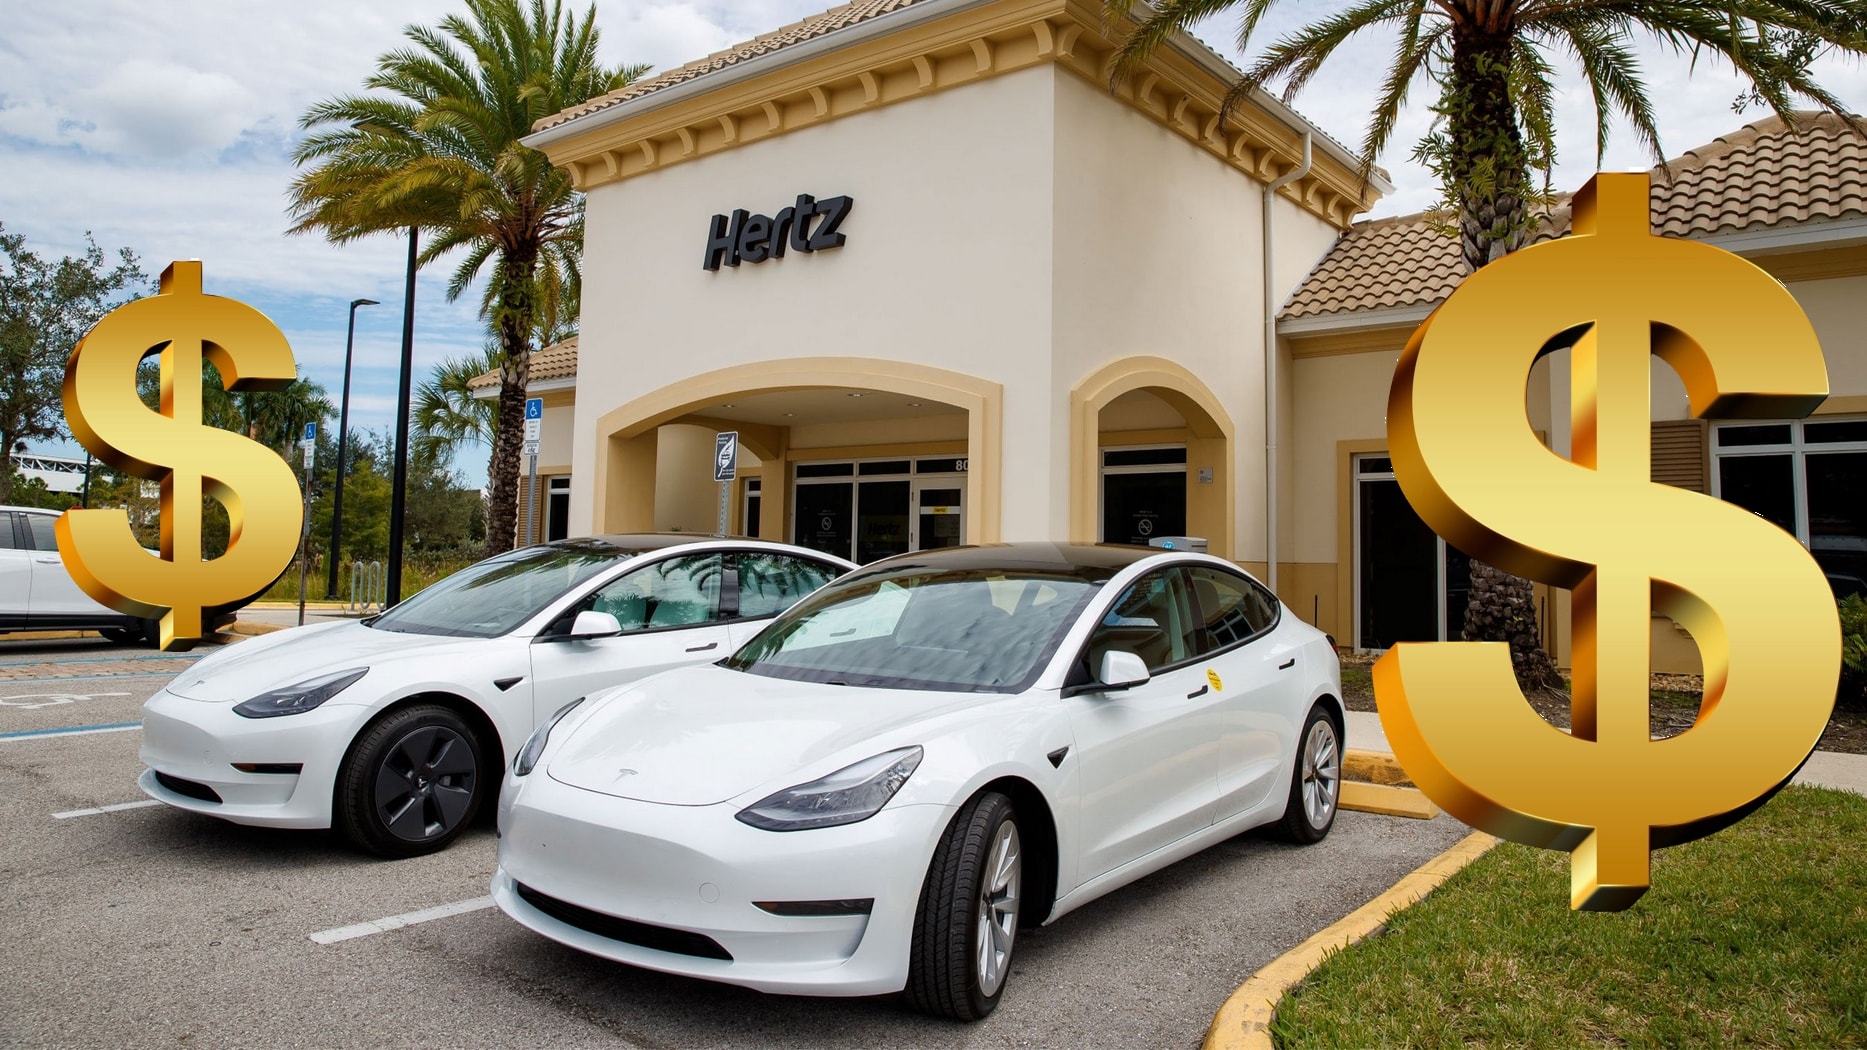 Uber and Hertz Deal Explains Hertz Contract With Tesla, But There's